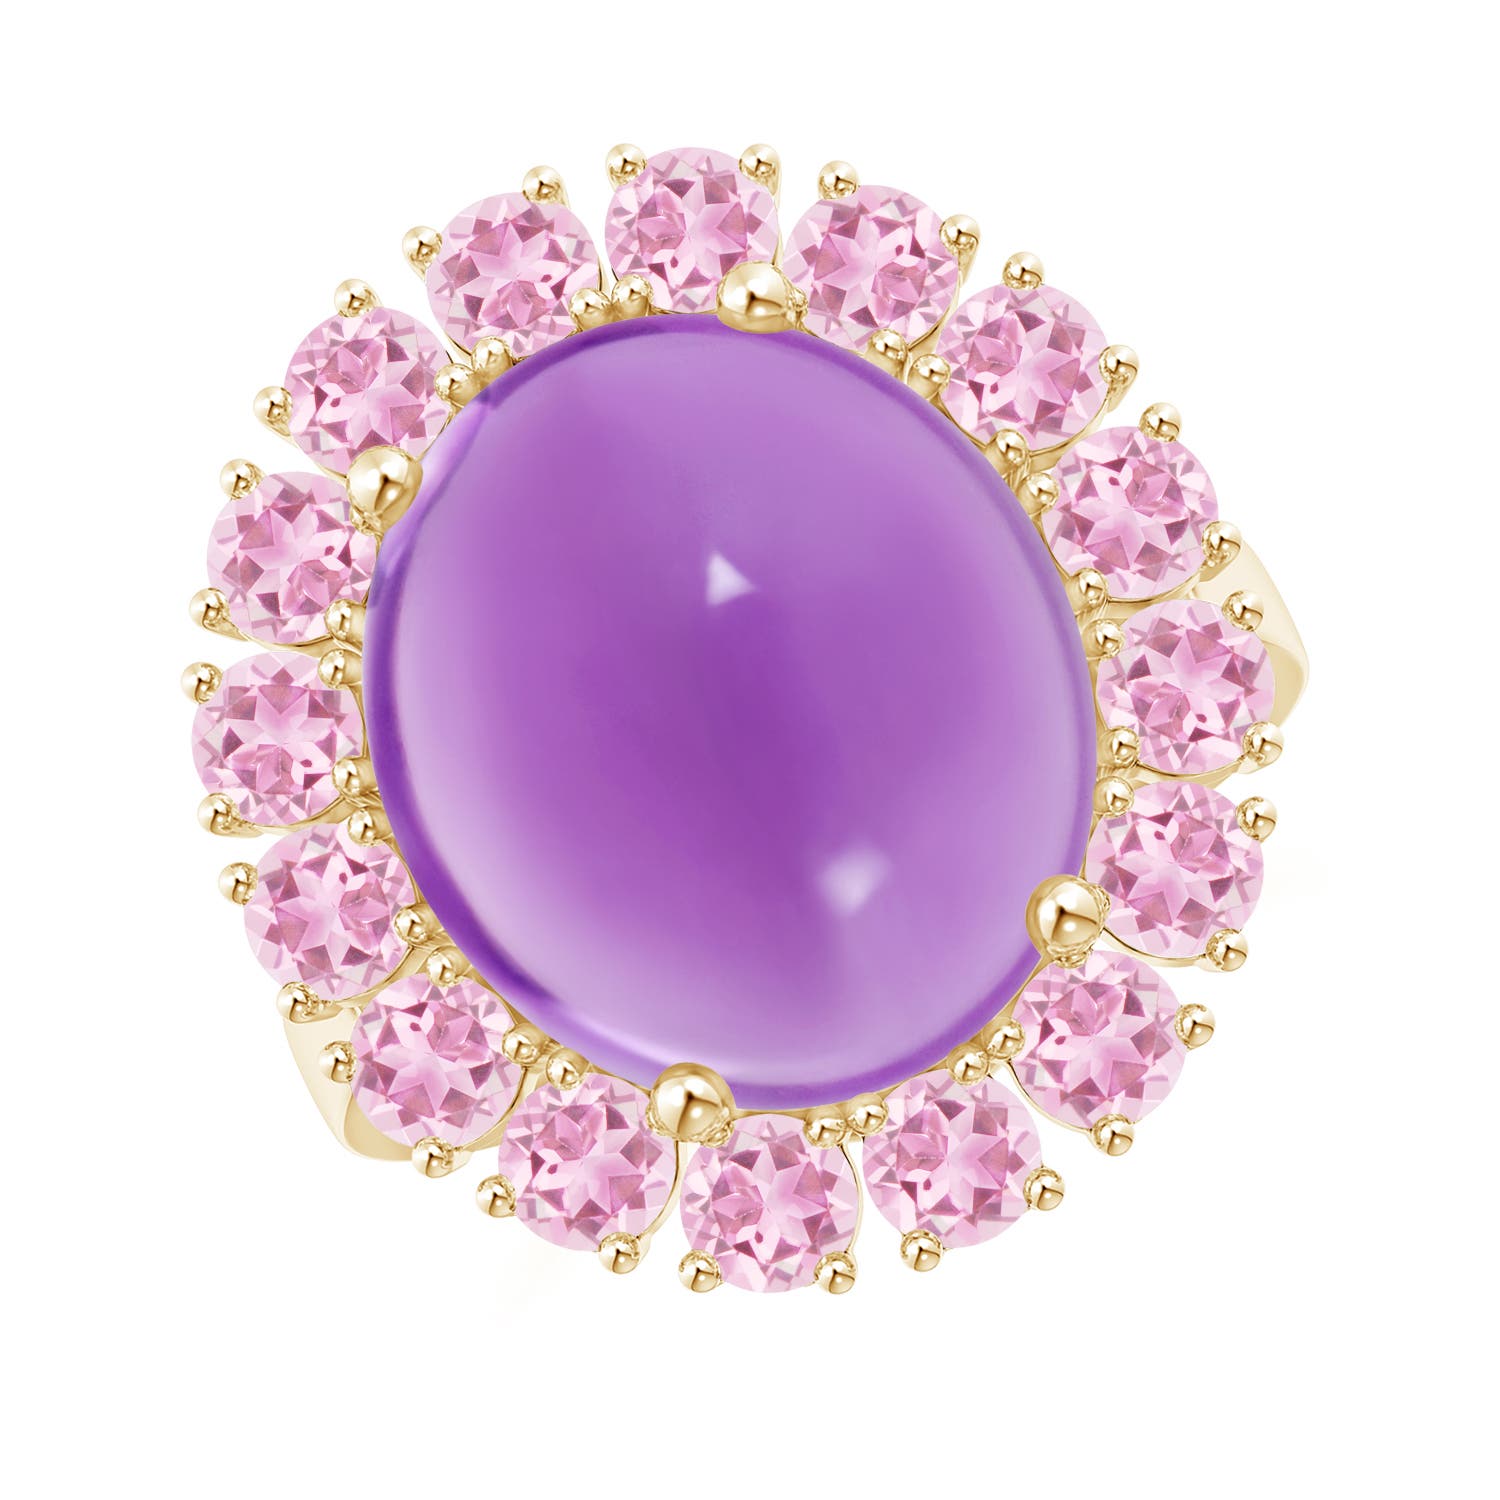 A - Amethyst / 10.26 CT / 14 KT Yellow Gold